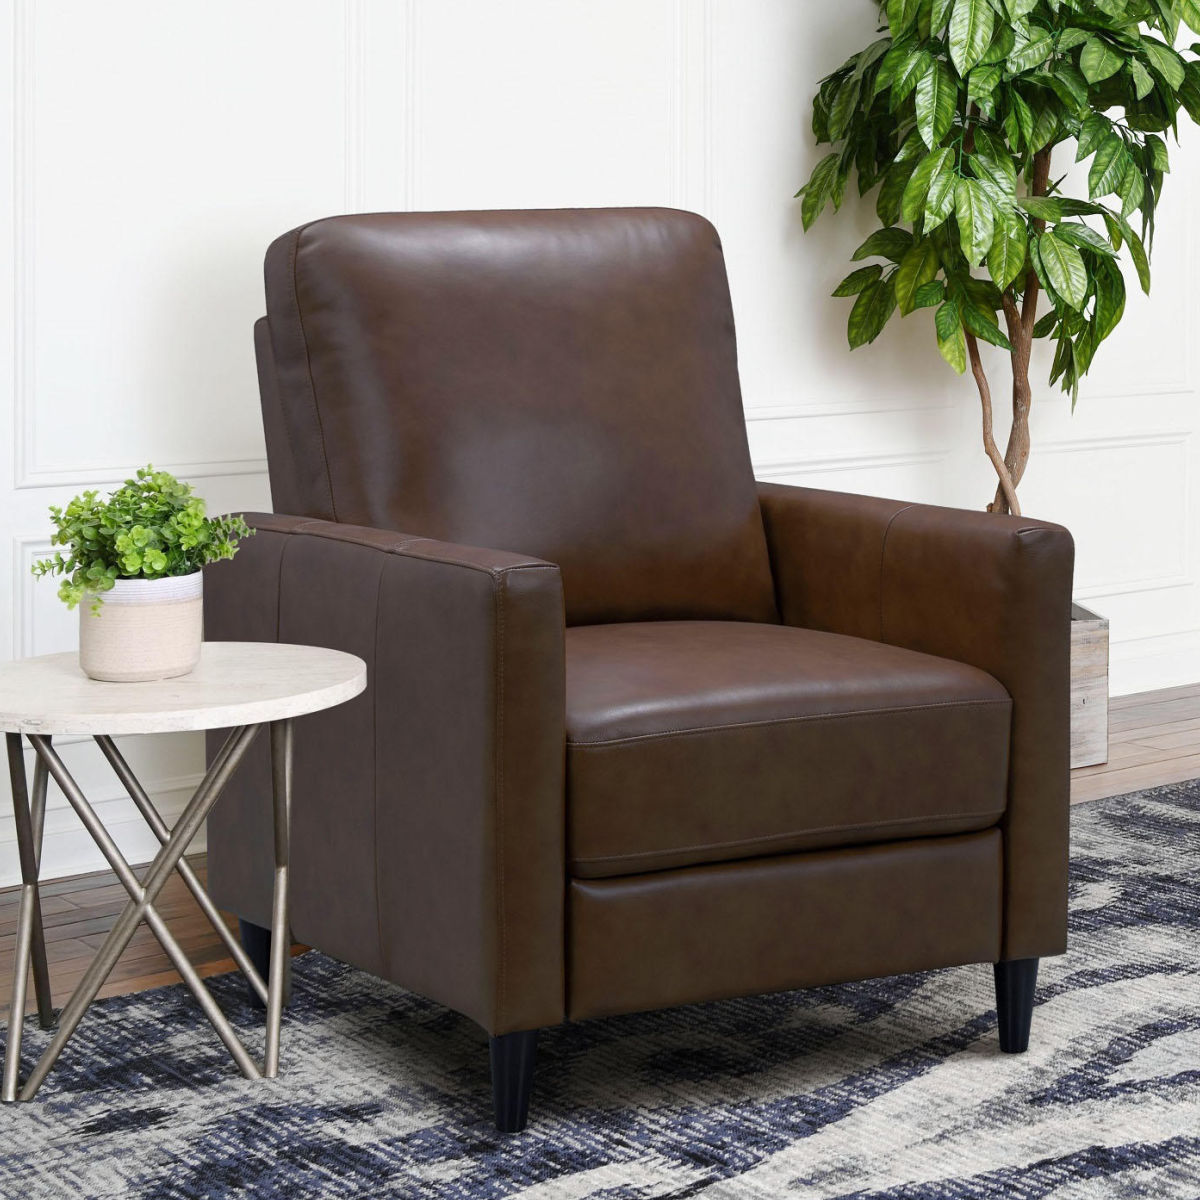 Abbyson Living Crestview Top-Grain Leather Pushback Recliner Chair